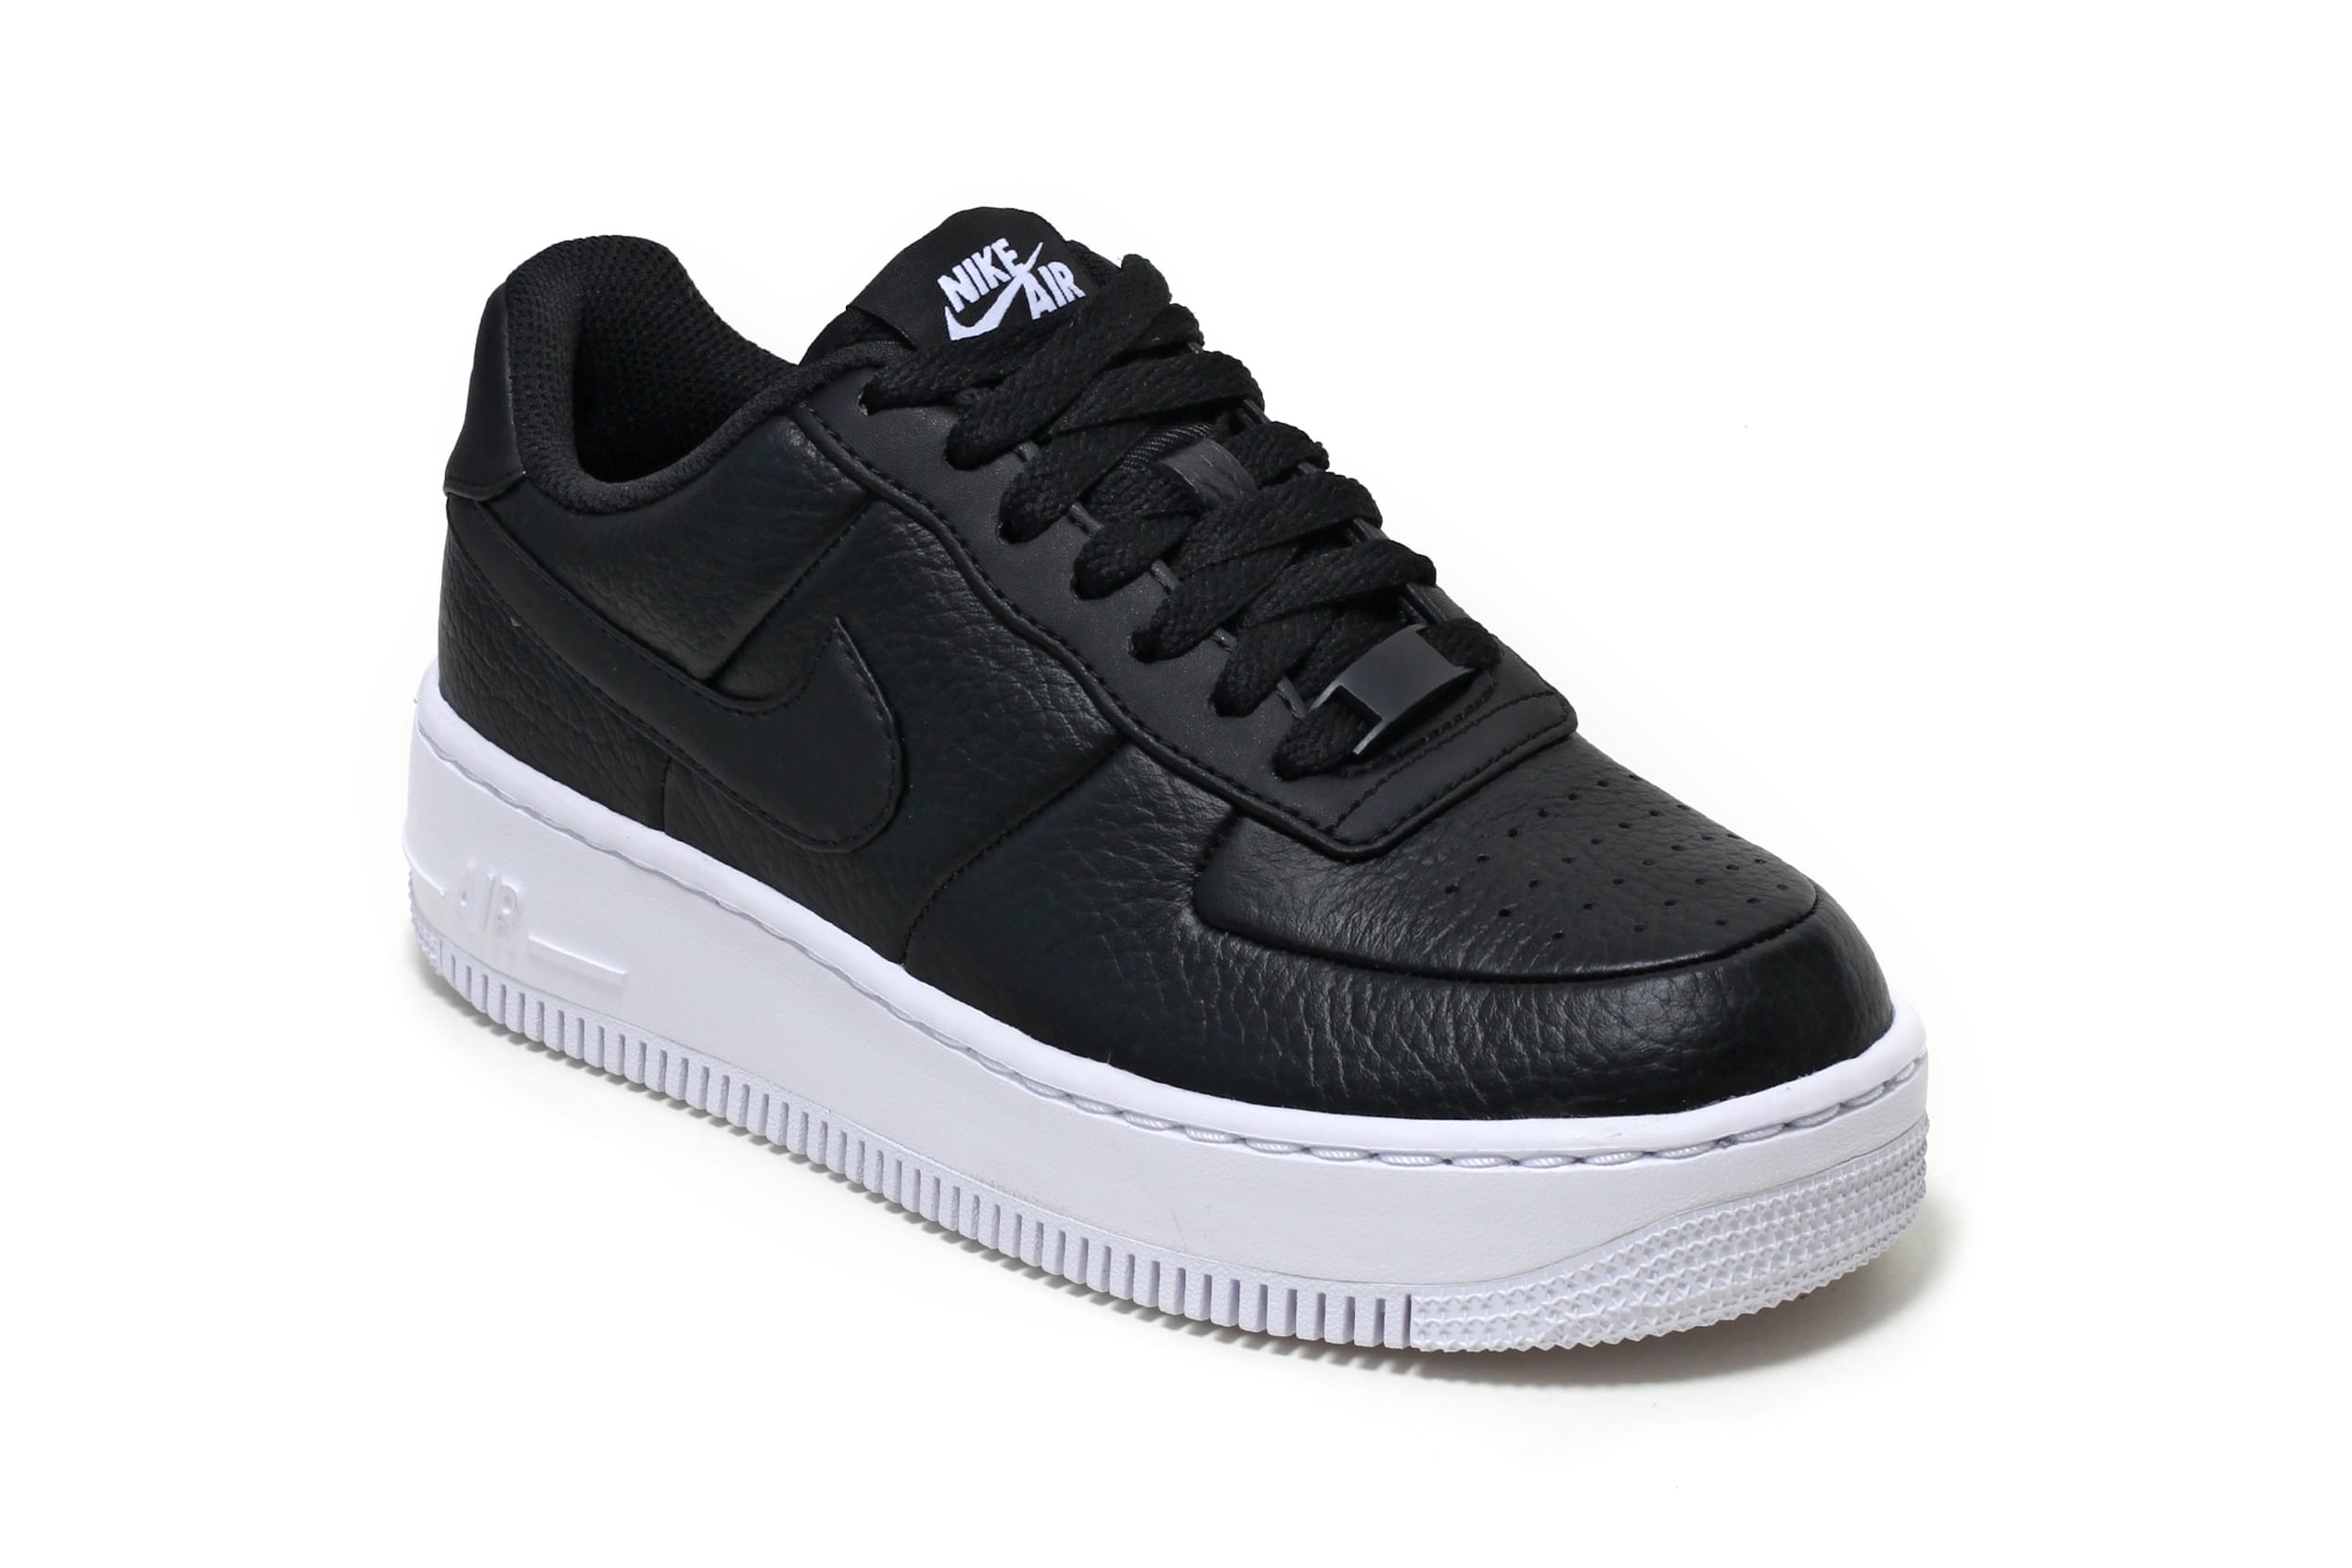 black air force 1 meaning